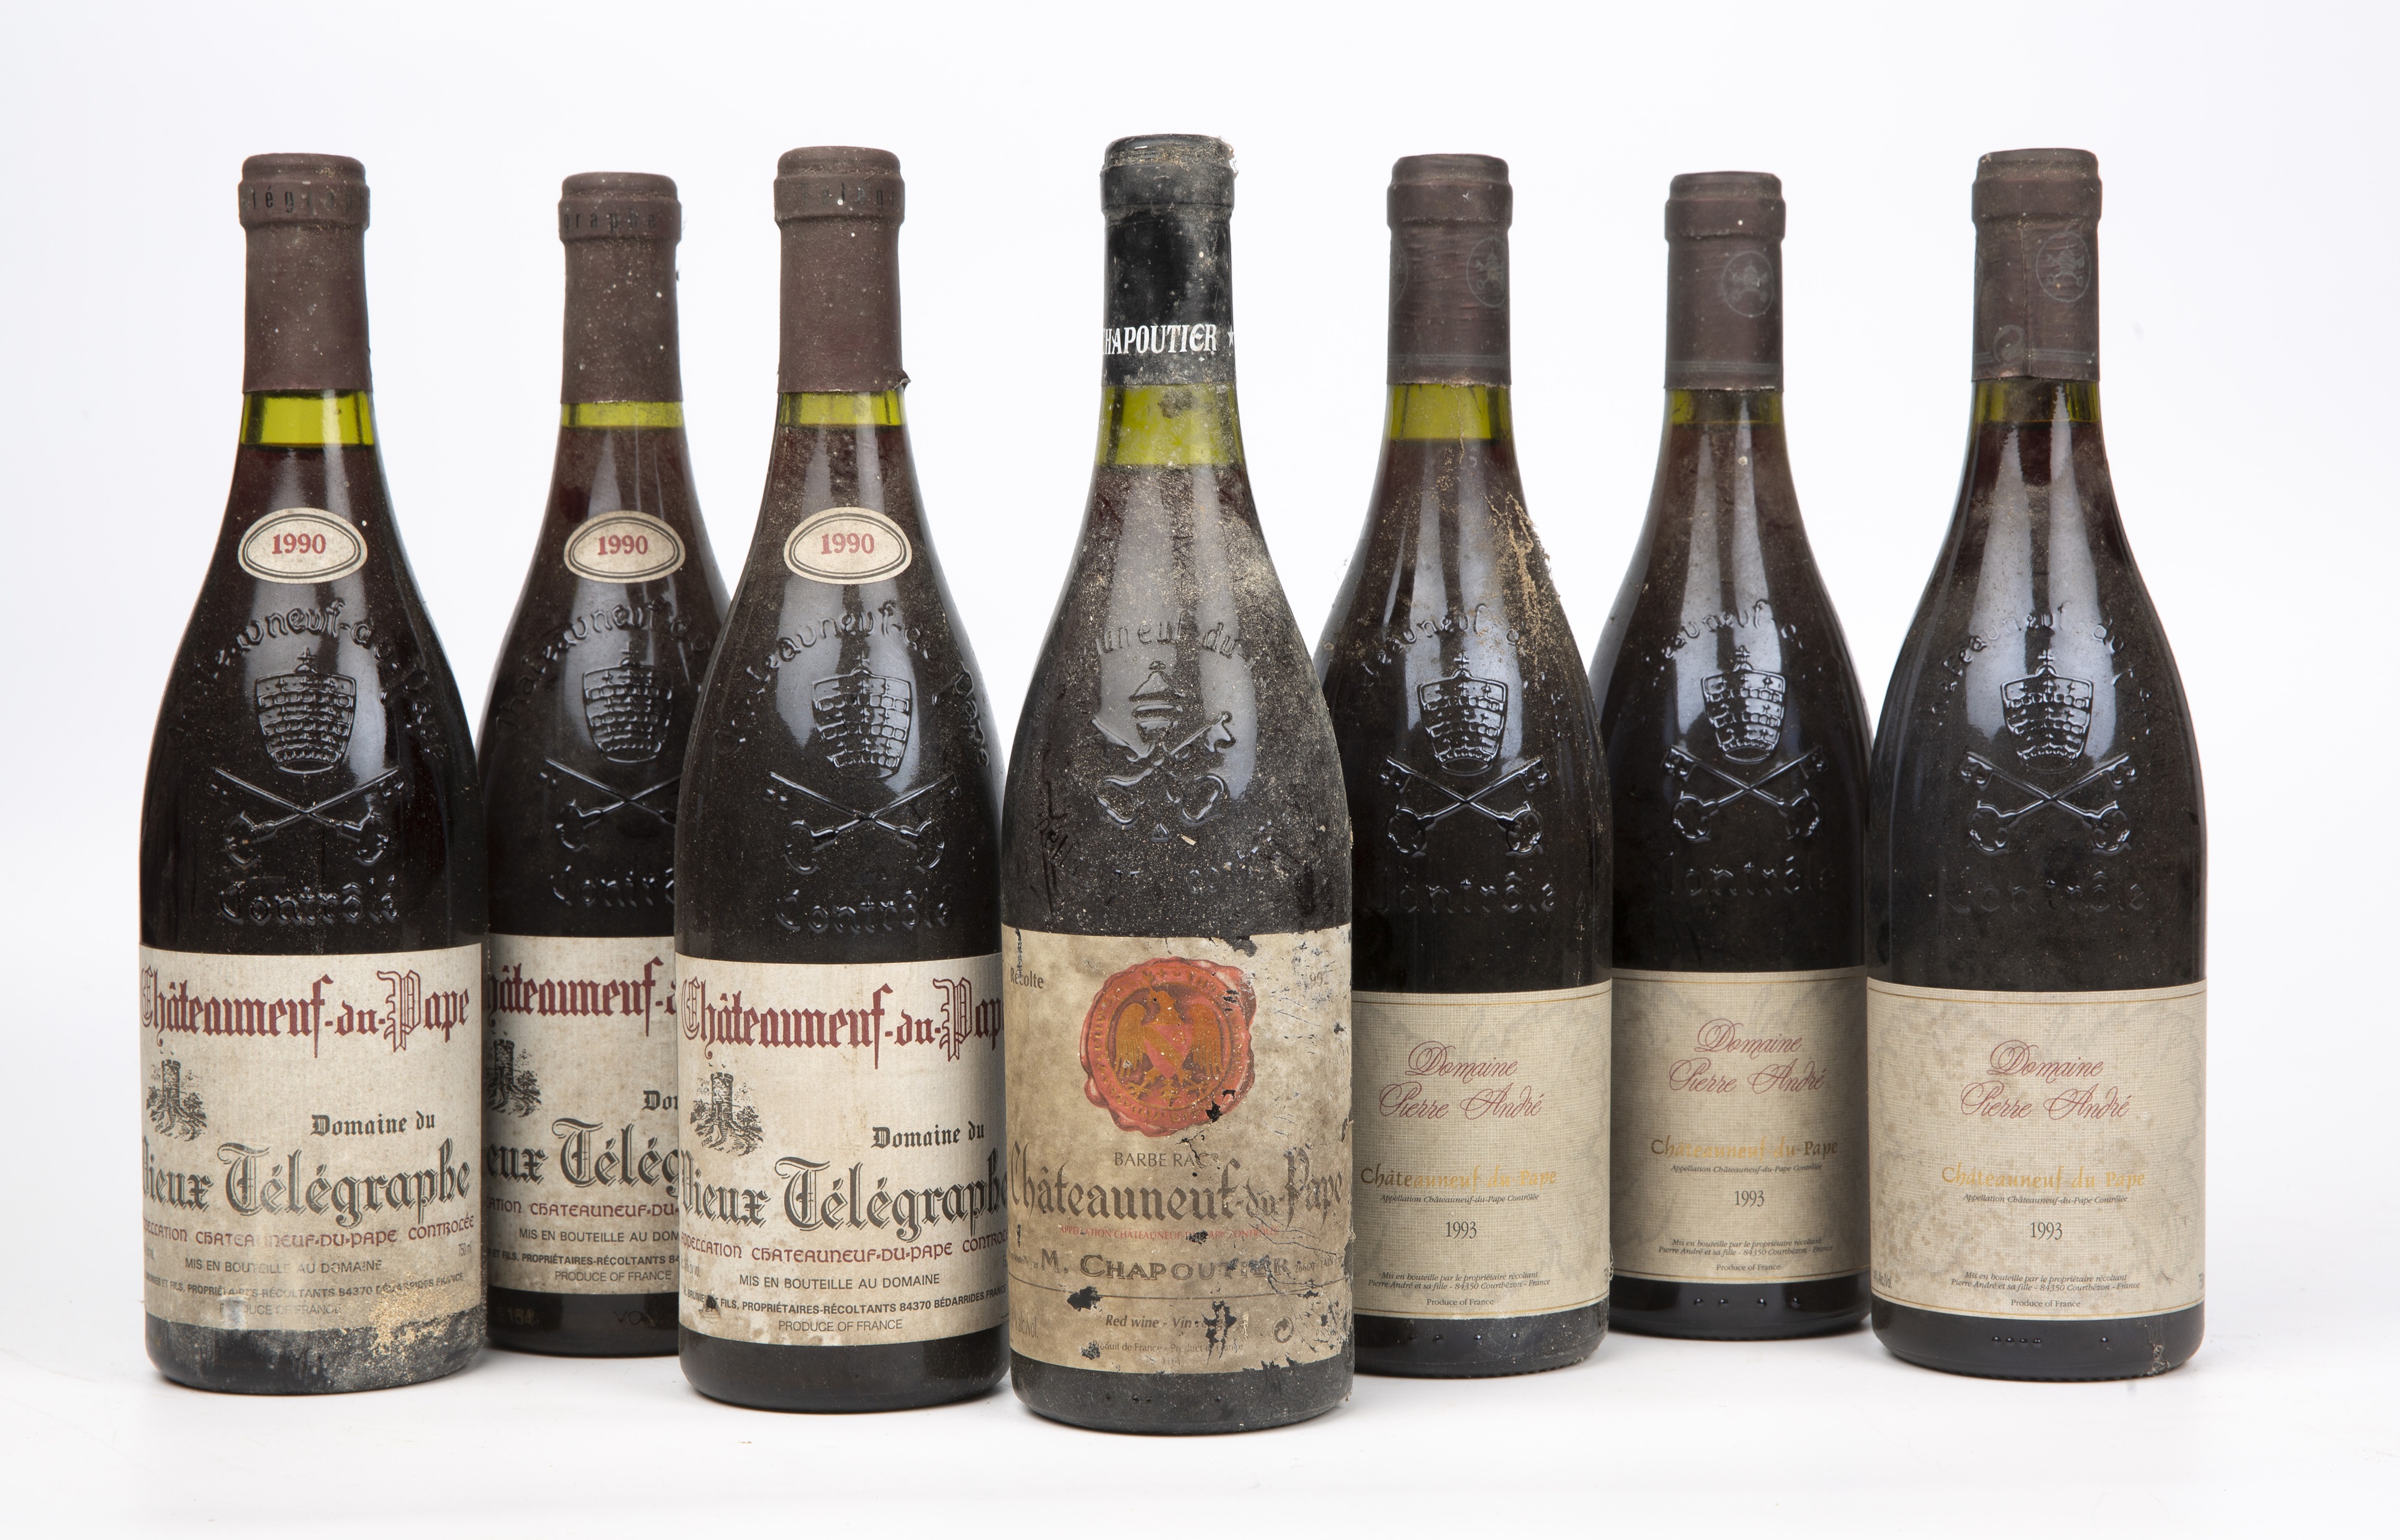 A bottle of 1992 M. Chapoutier Chateauneuf-du-Pape Barbe Rac, Rhone, France and three bottles of